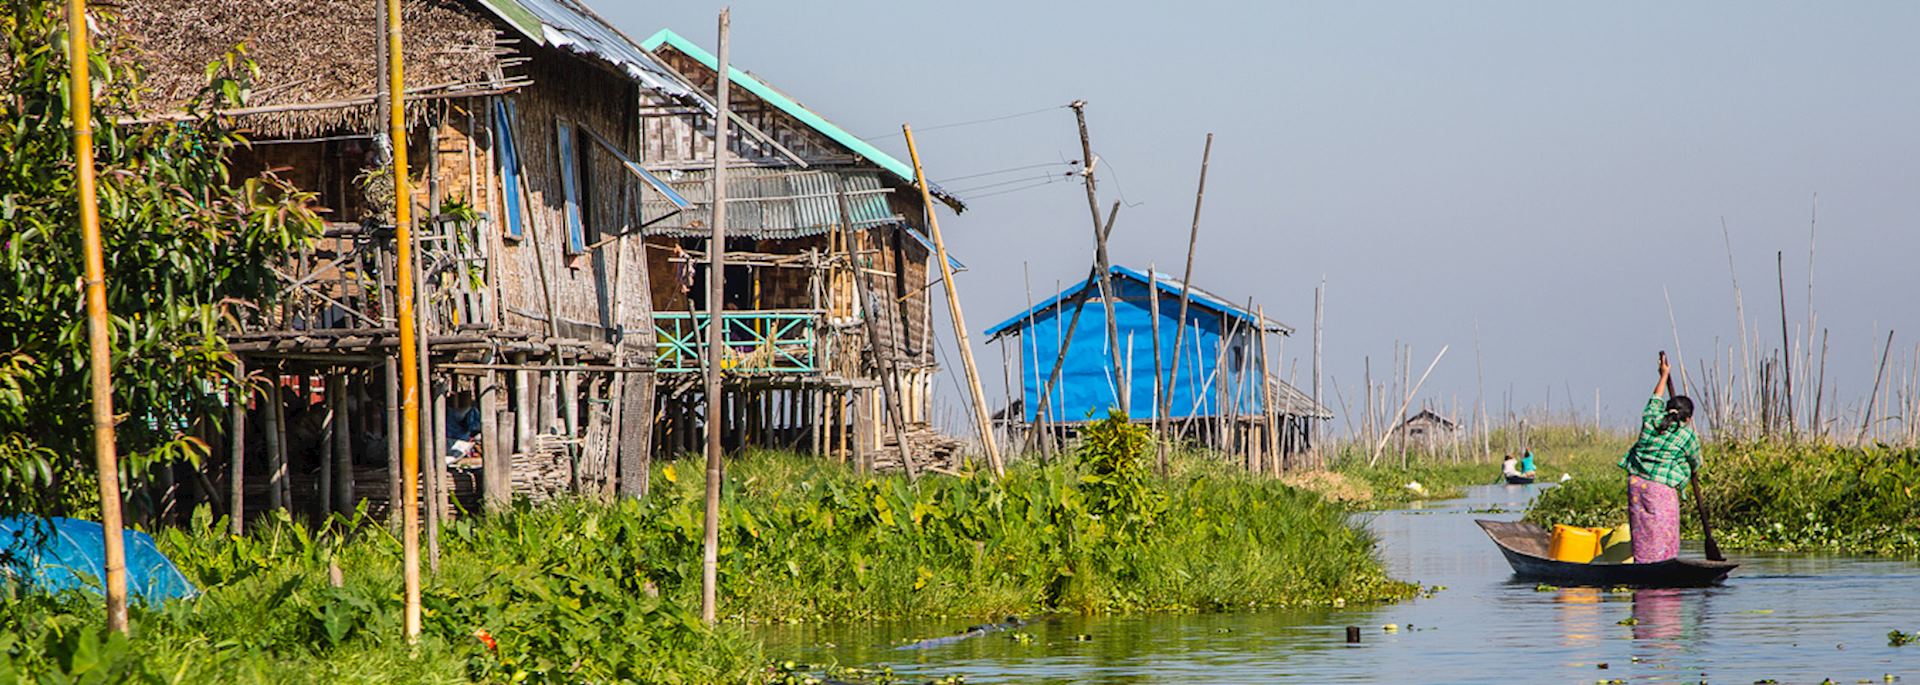 Visit Inle Lake with its floating vegetable patches and stilted homes